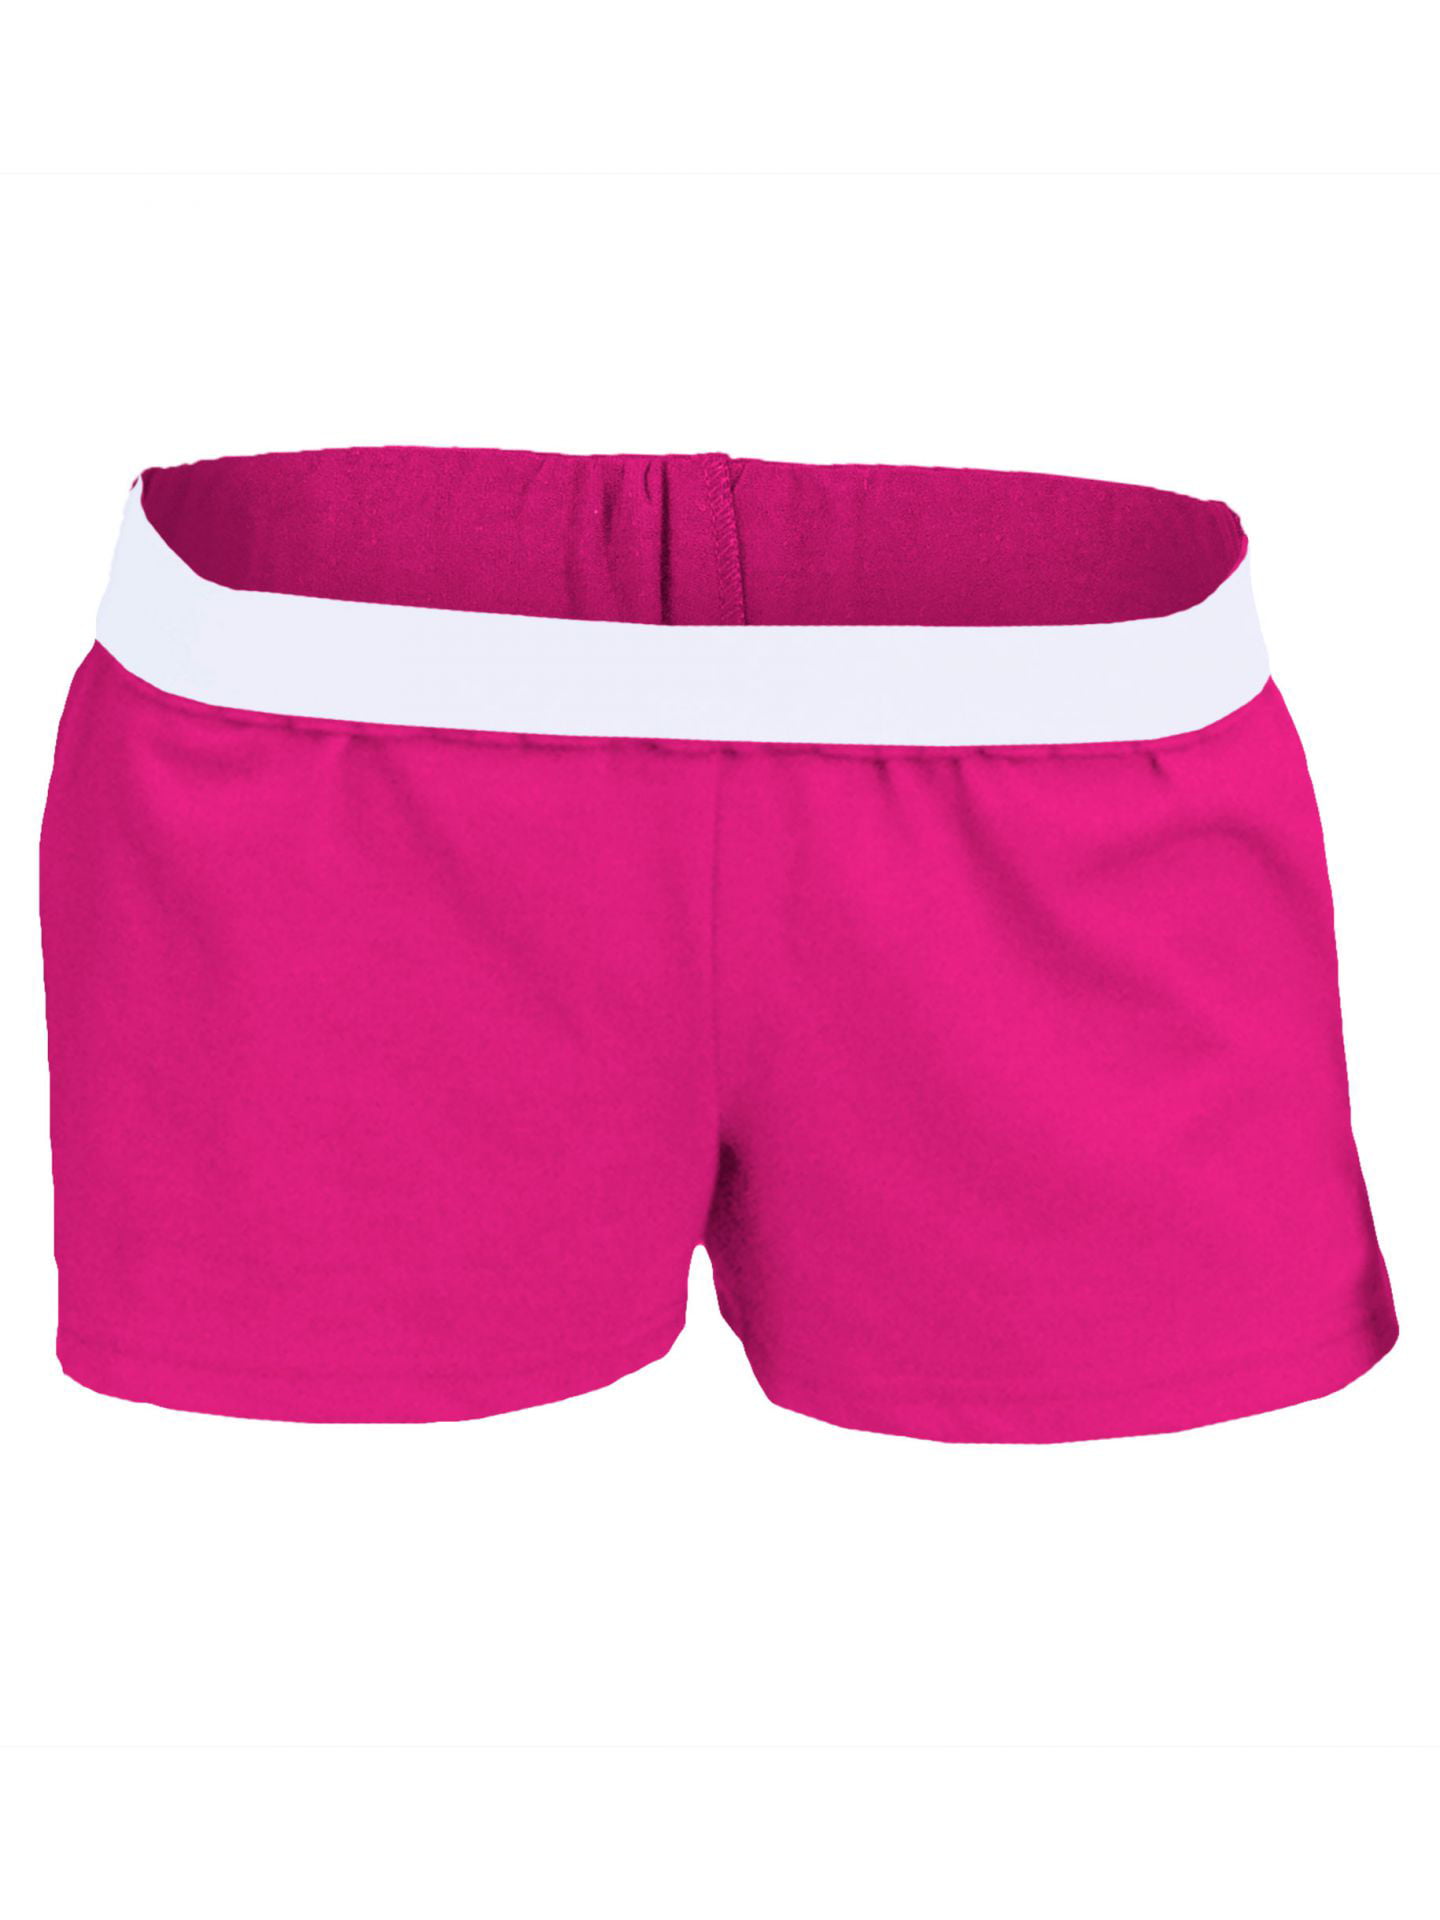 low rise shorts for juniors